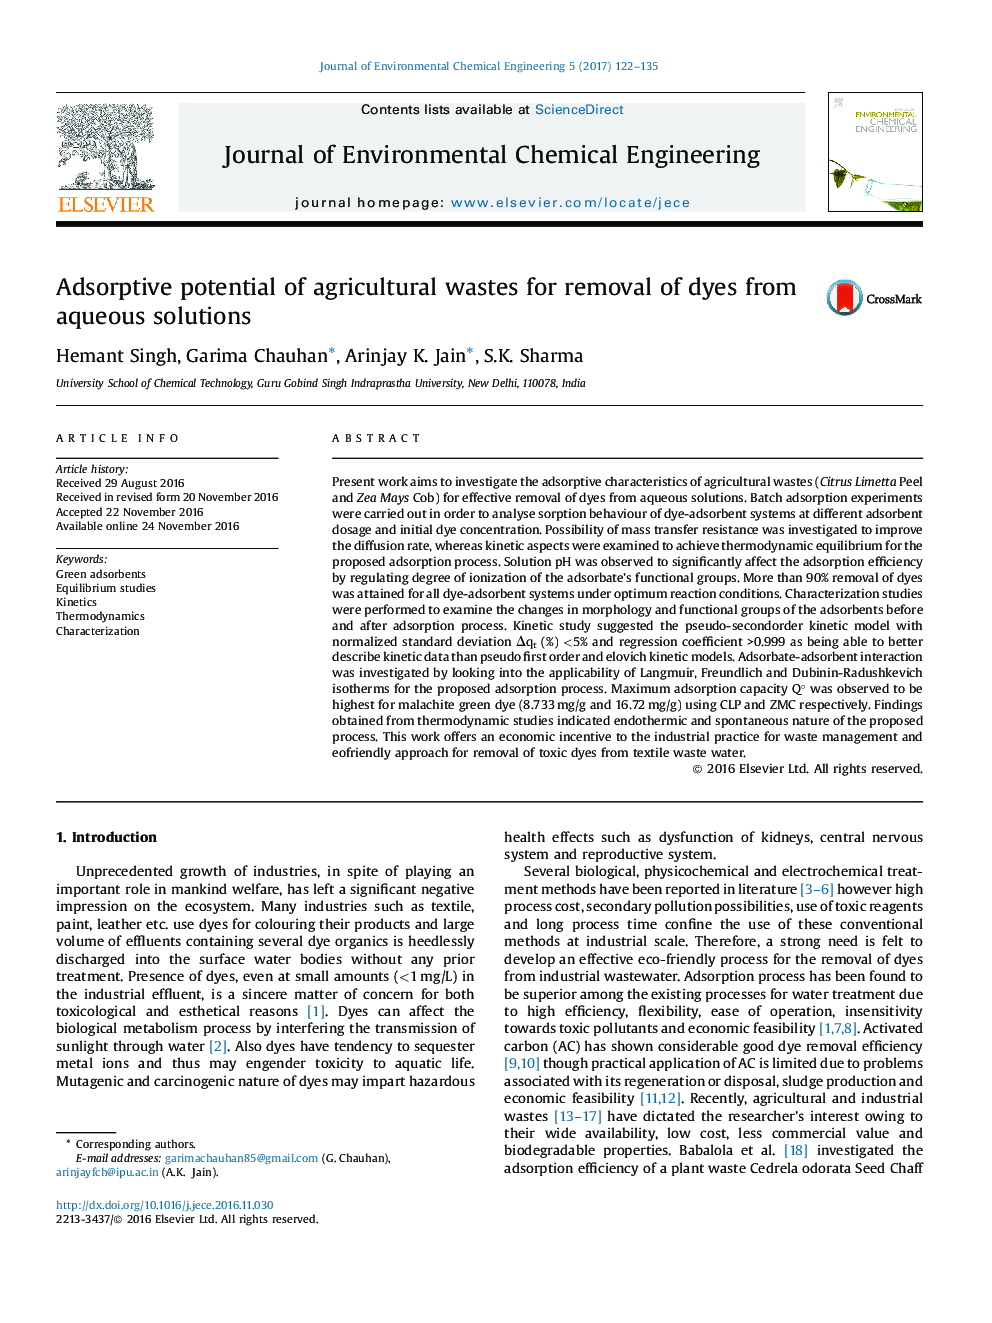 Adsorptive potential of agricultural wastes for removal of dyes from aqueous solutions